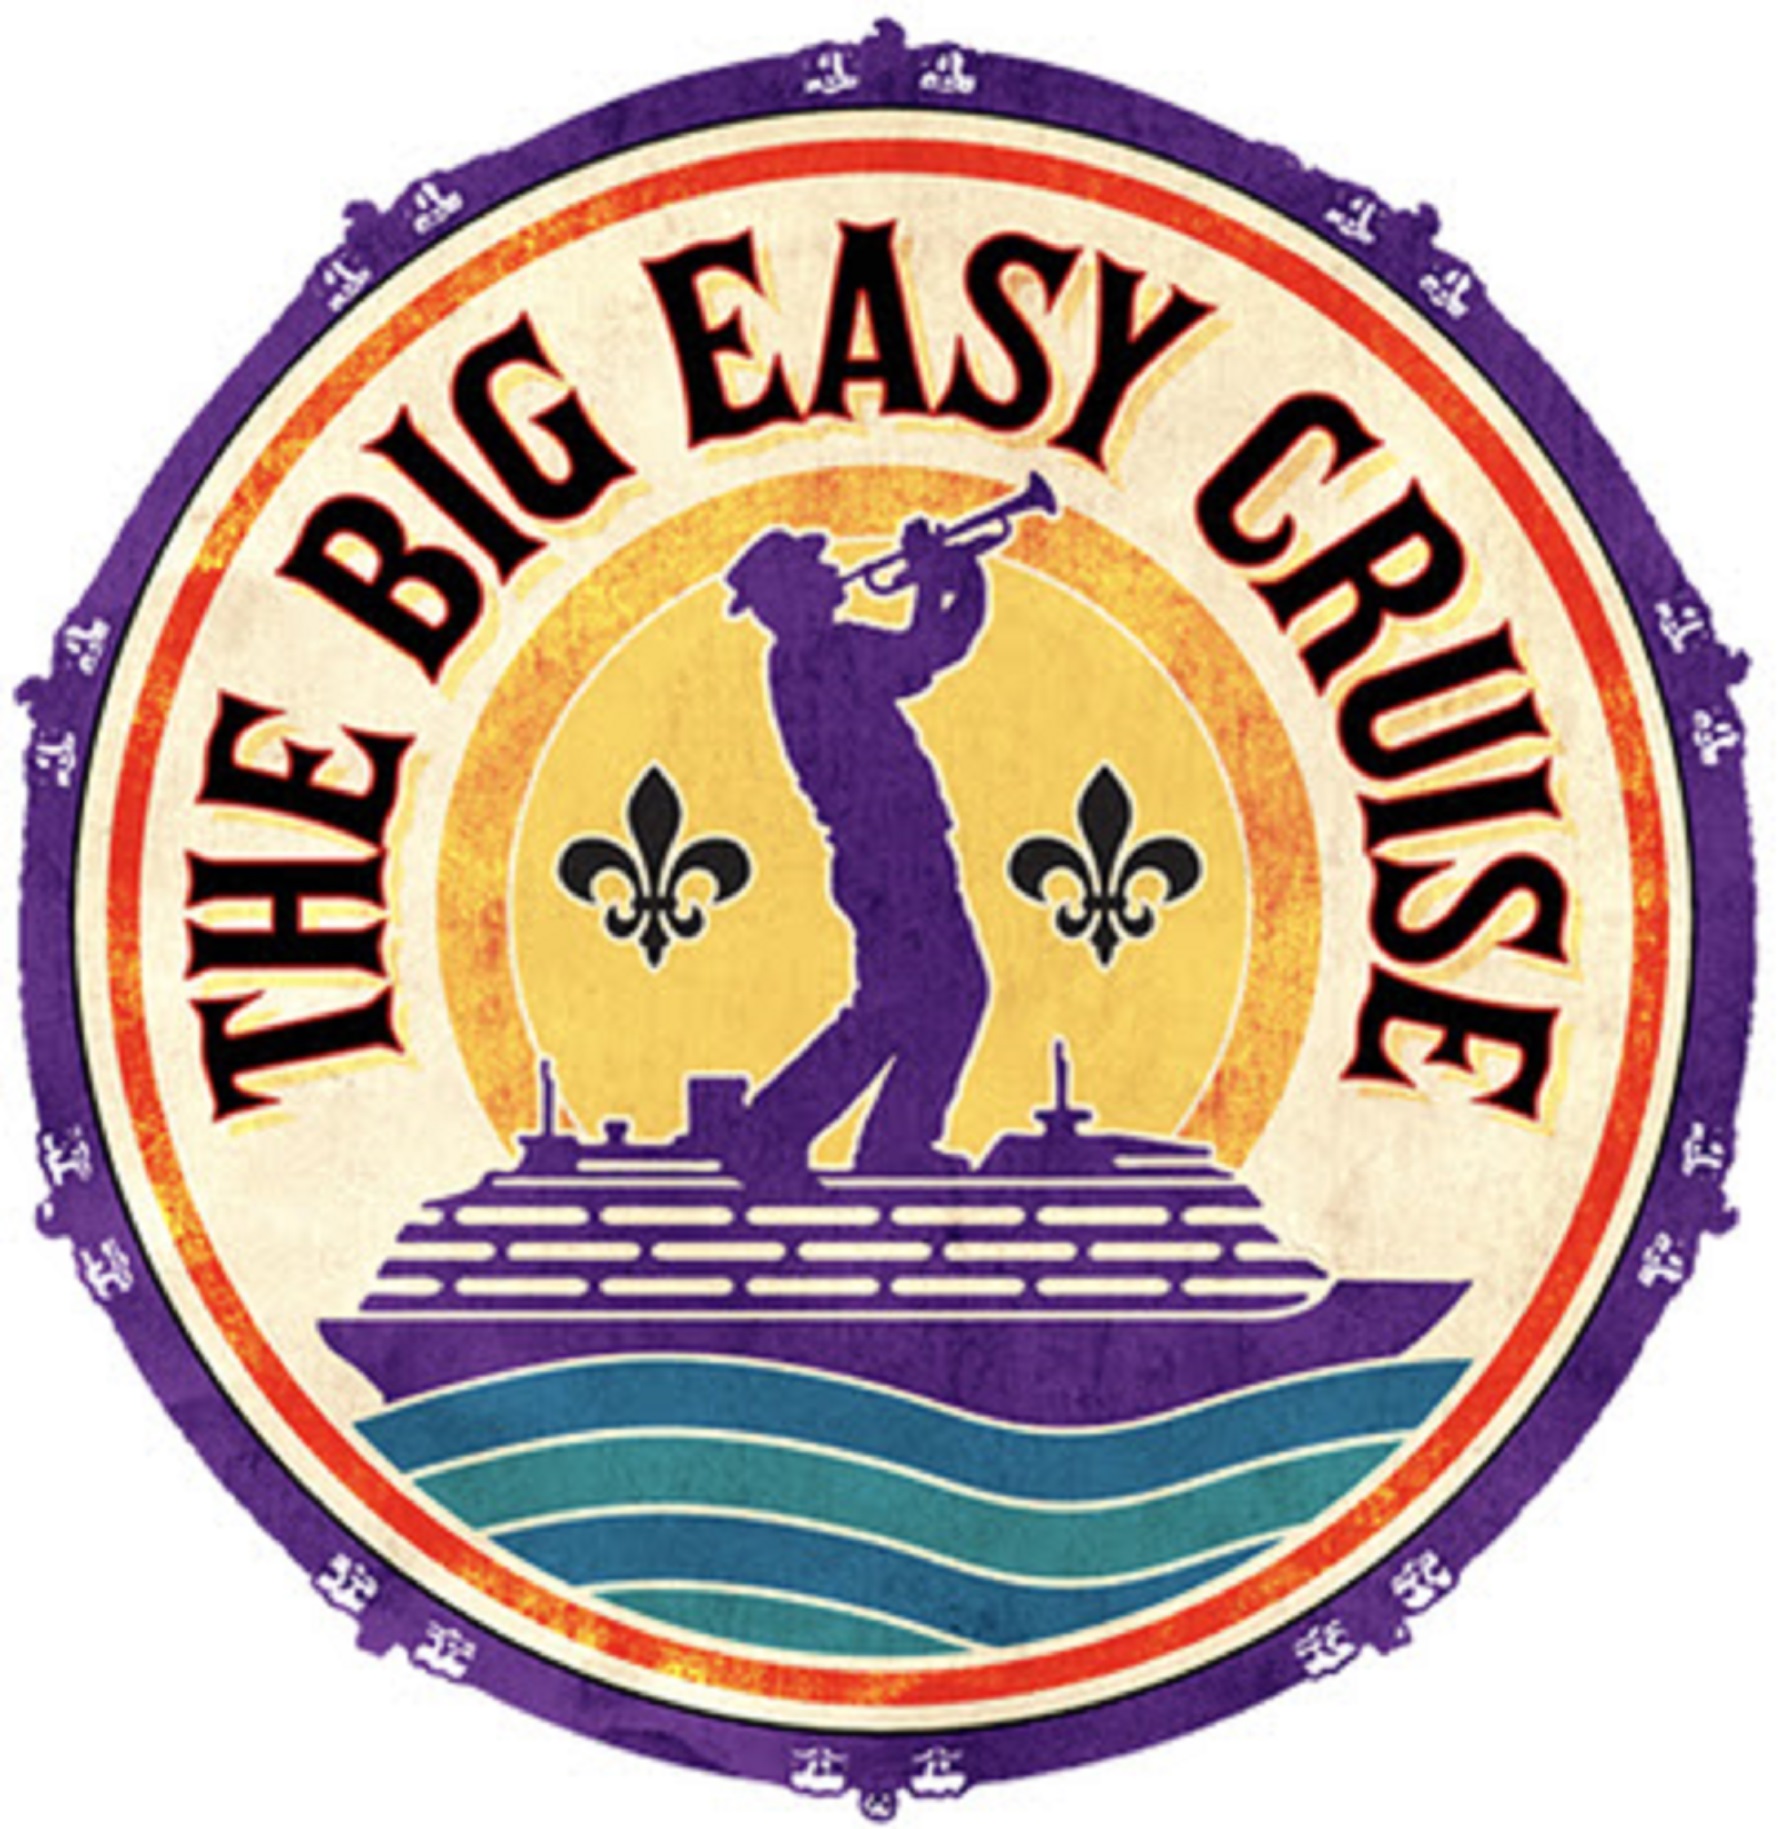 THE BIG EASY CRUISE SAILS AGAIN IN JANUARY 2025